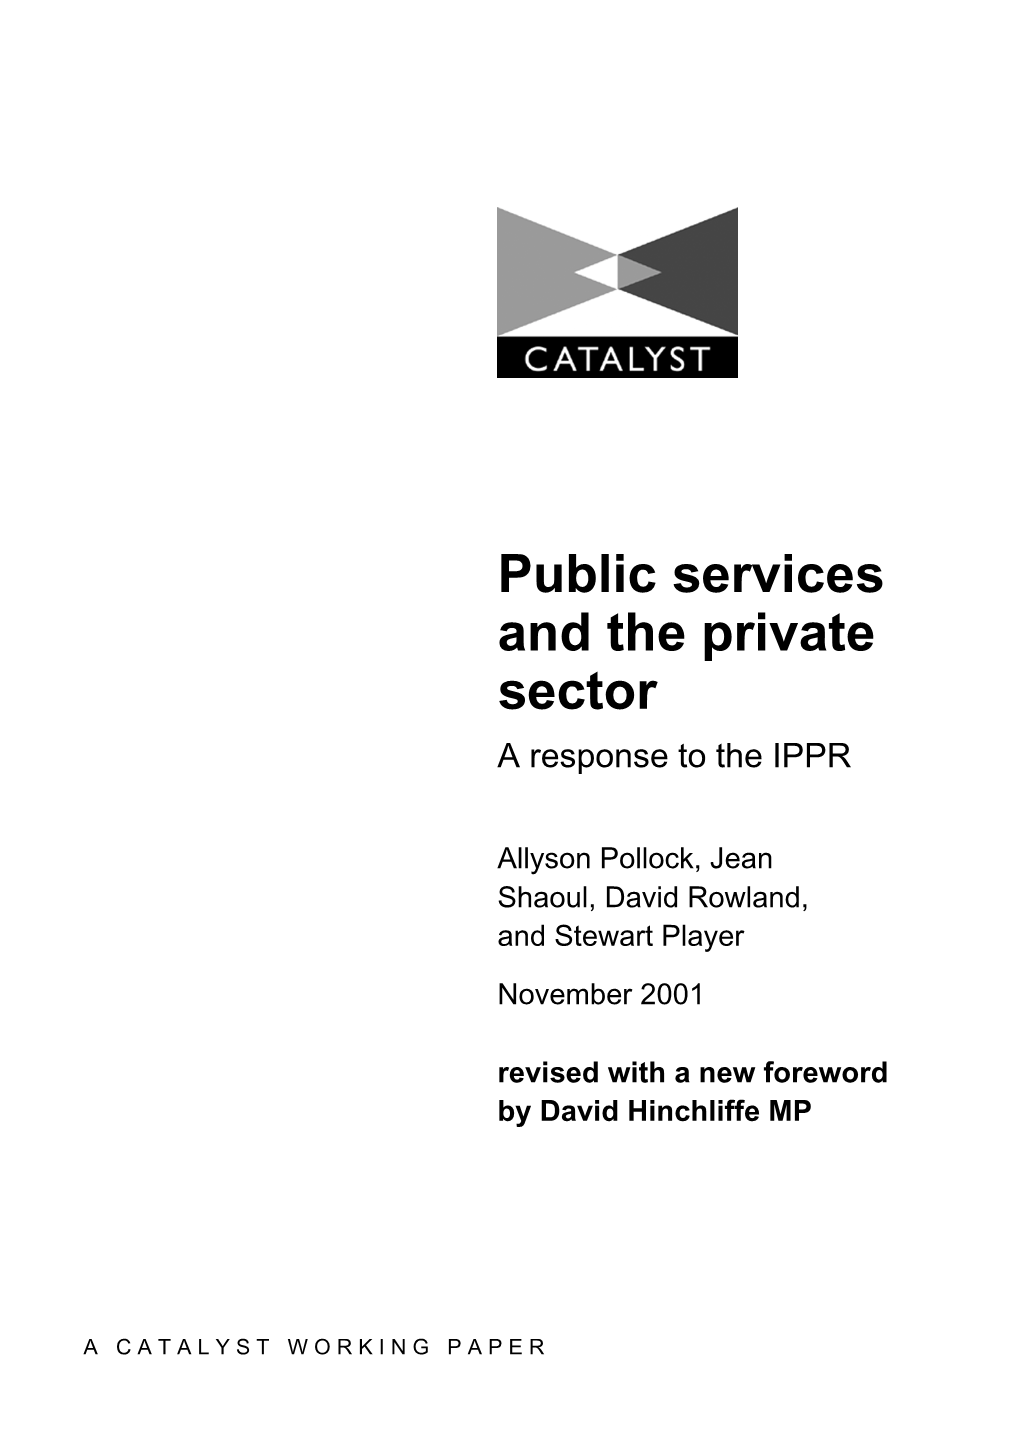 Public Services and the Private Sector – a Response to the IPPR